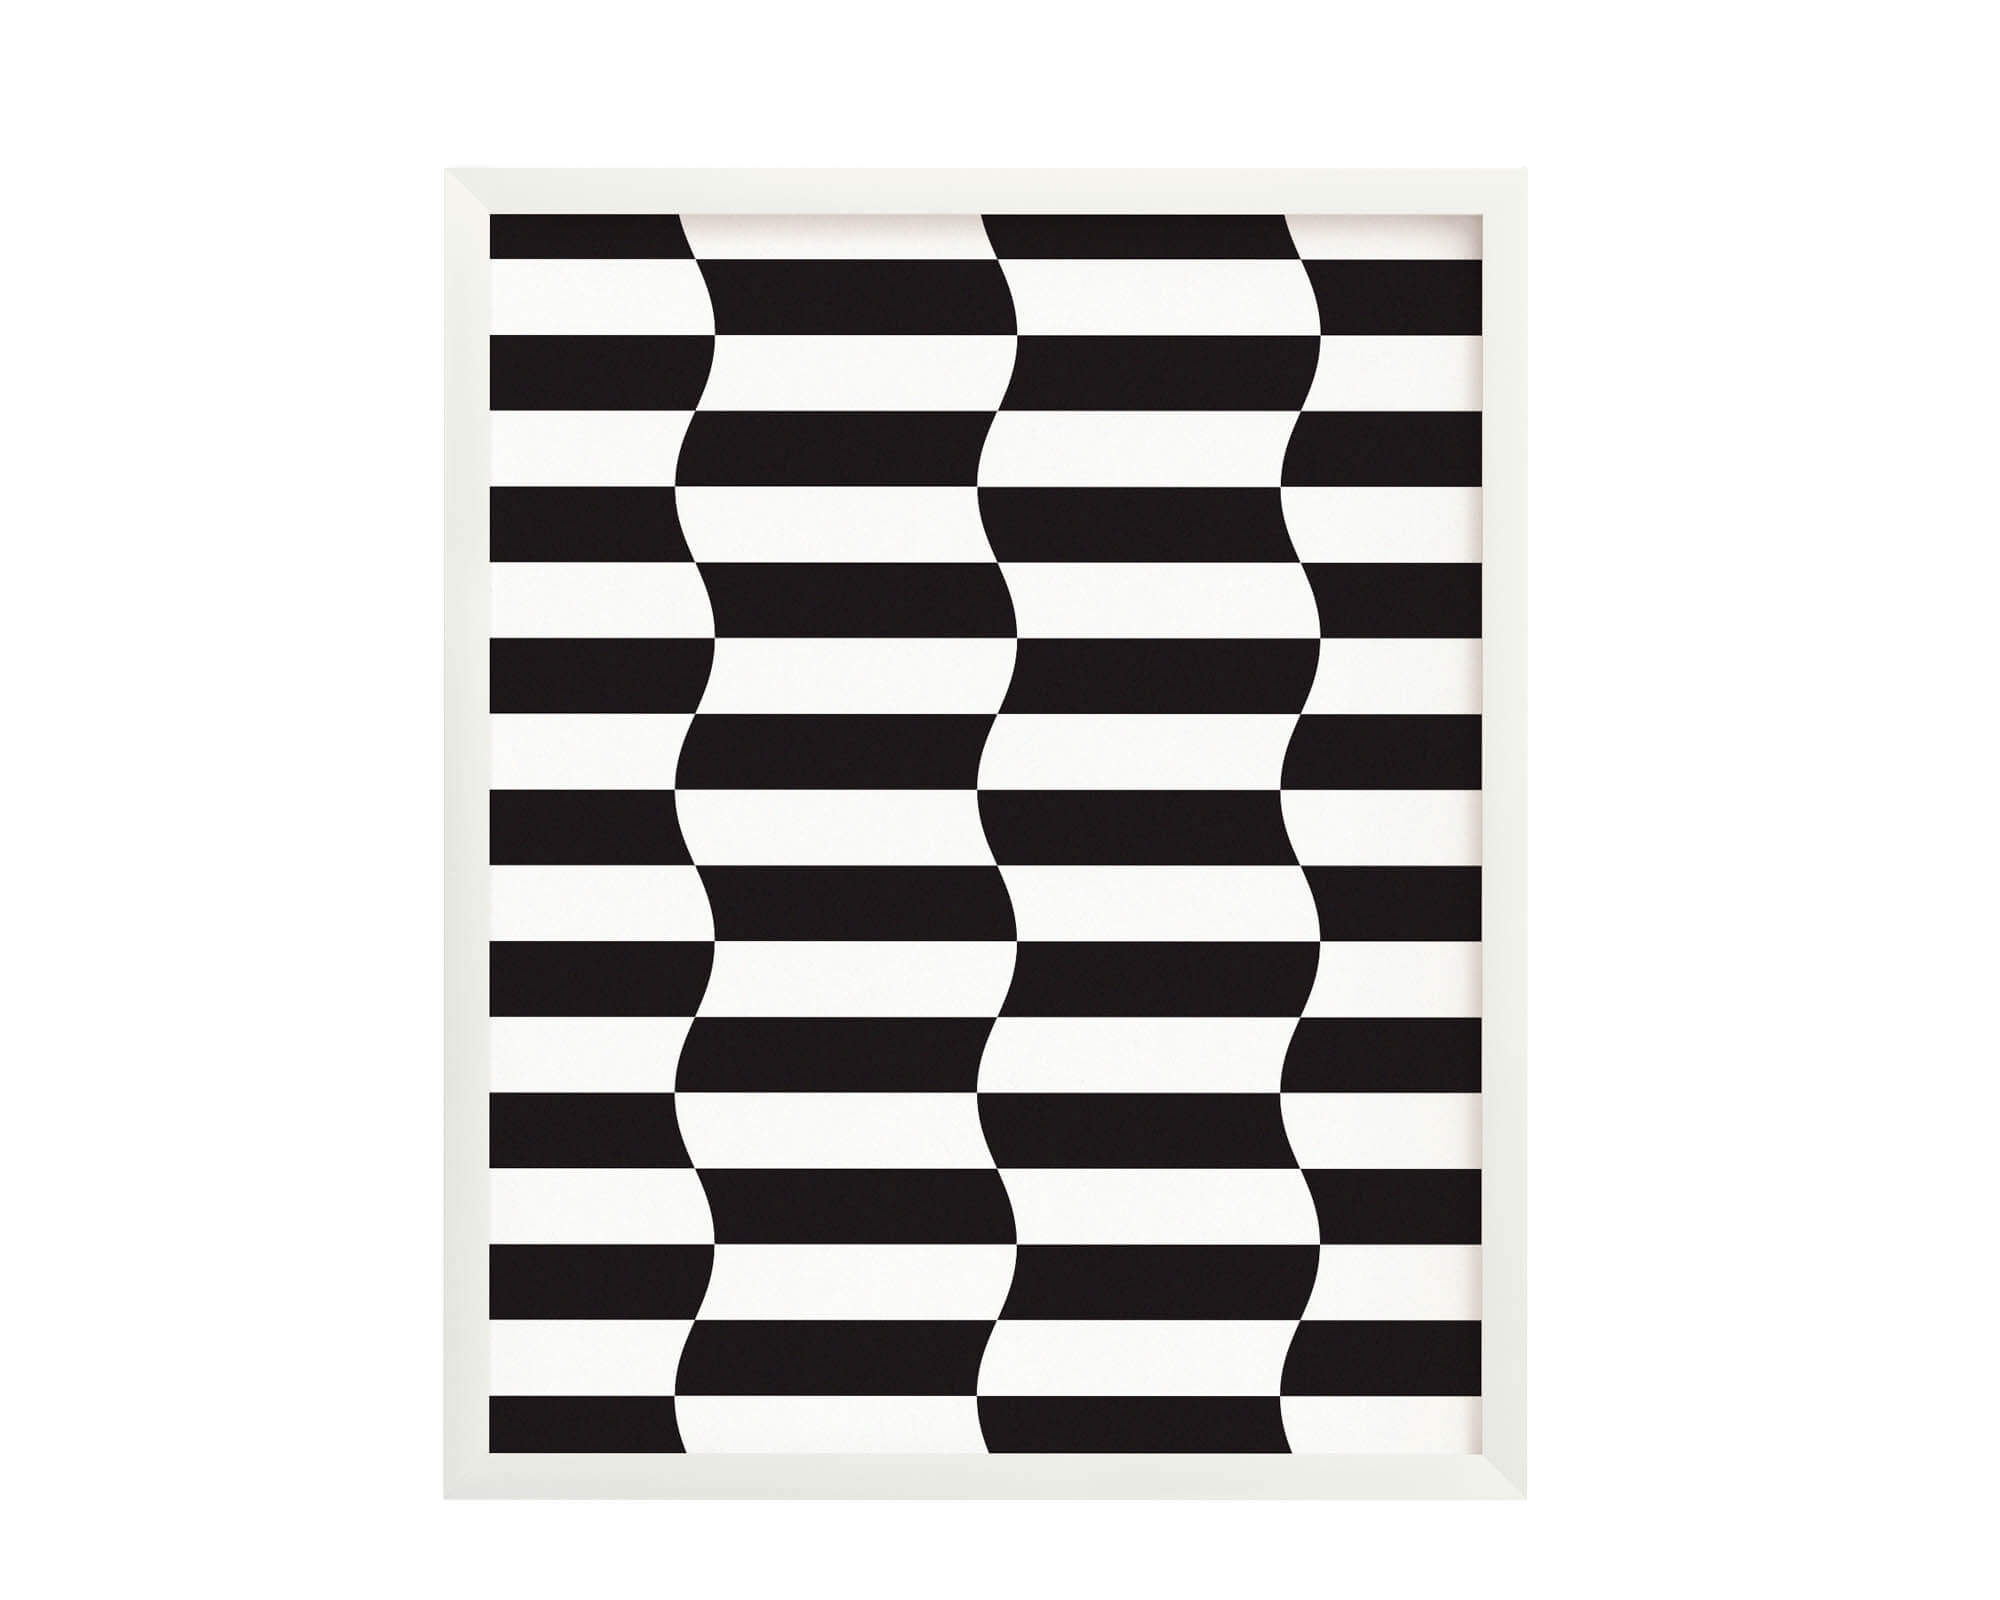 "Striple Double" hypnotic wavy checker op art inspired black and white striped archival giclée art print. Made in USA by My Darlin' @mydarlin_bk